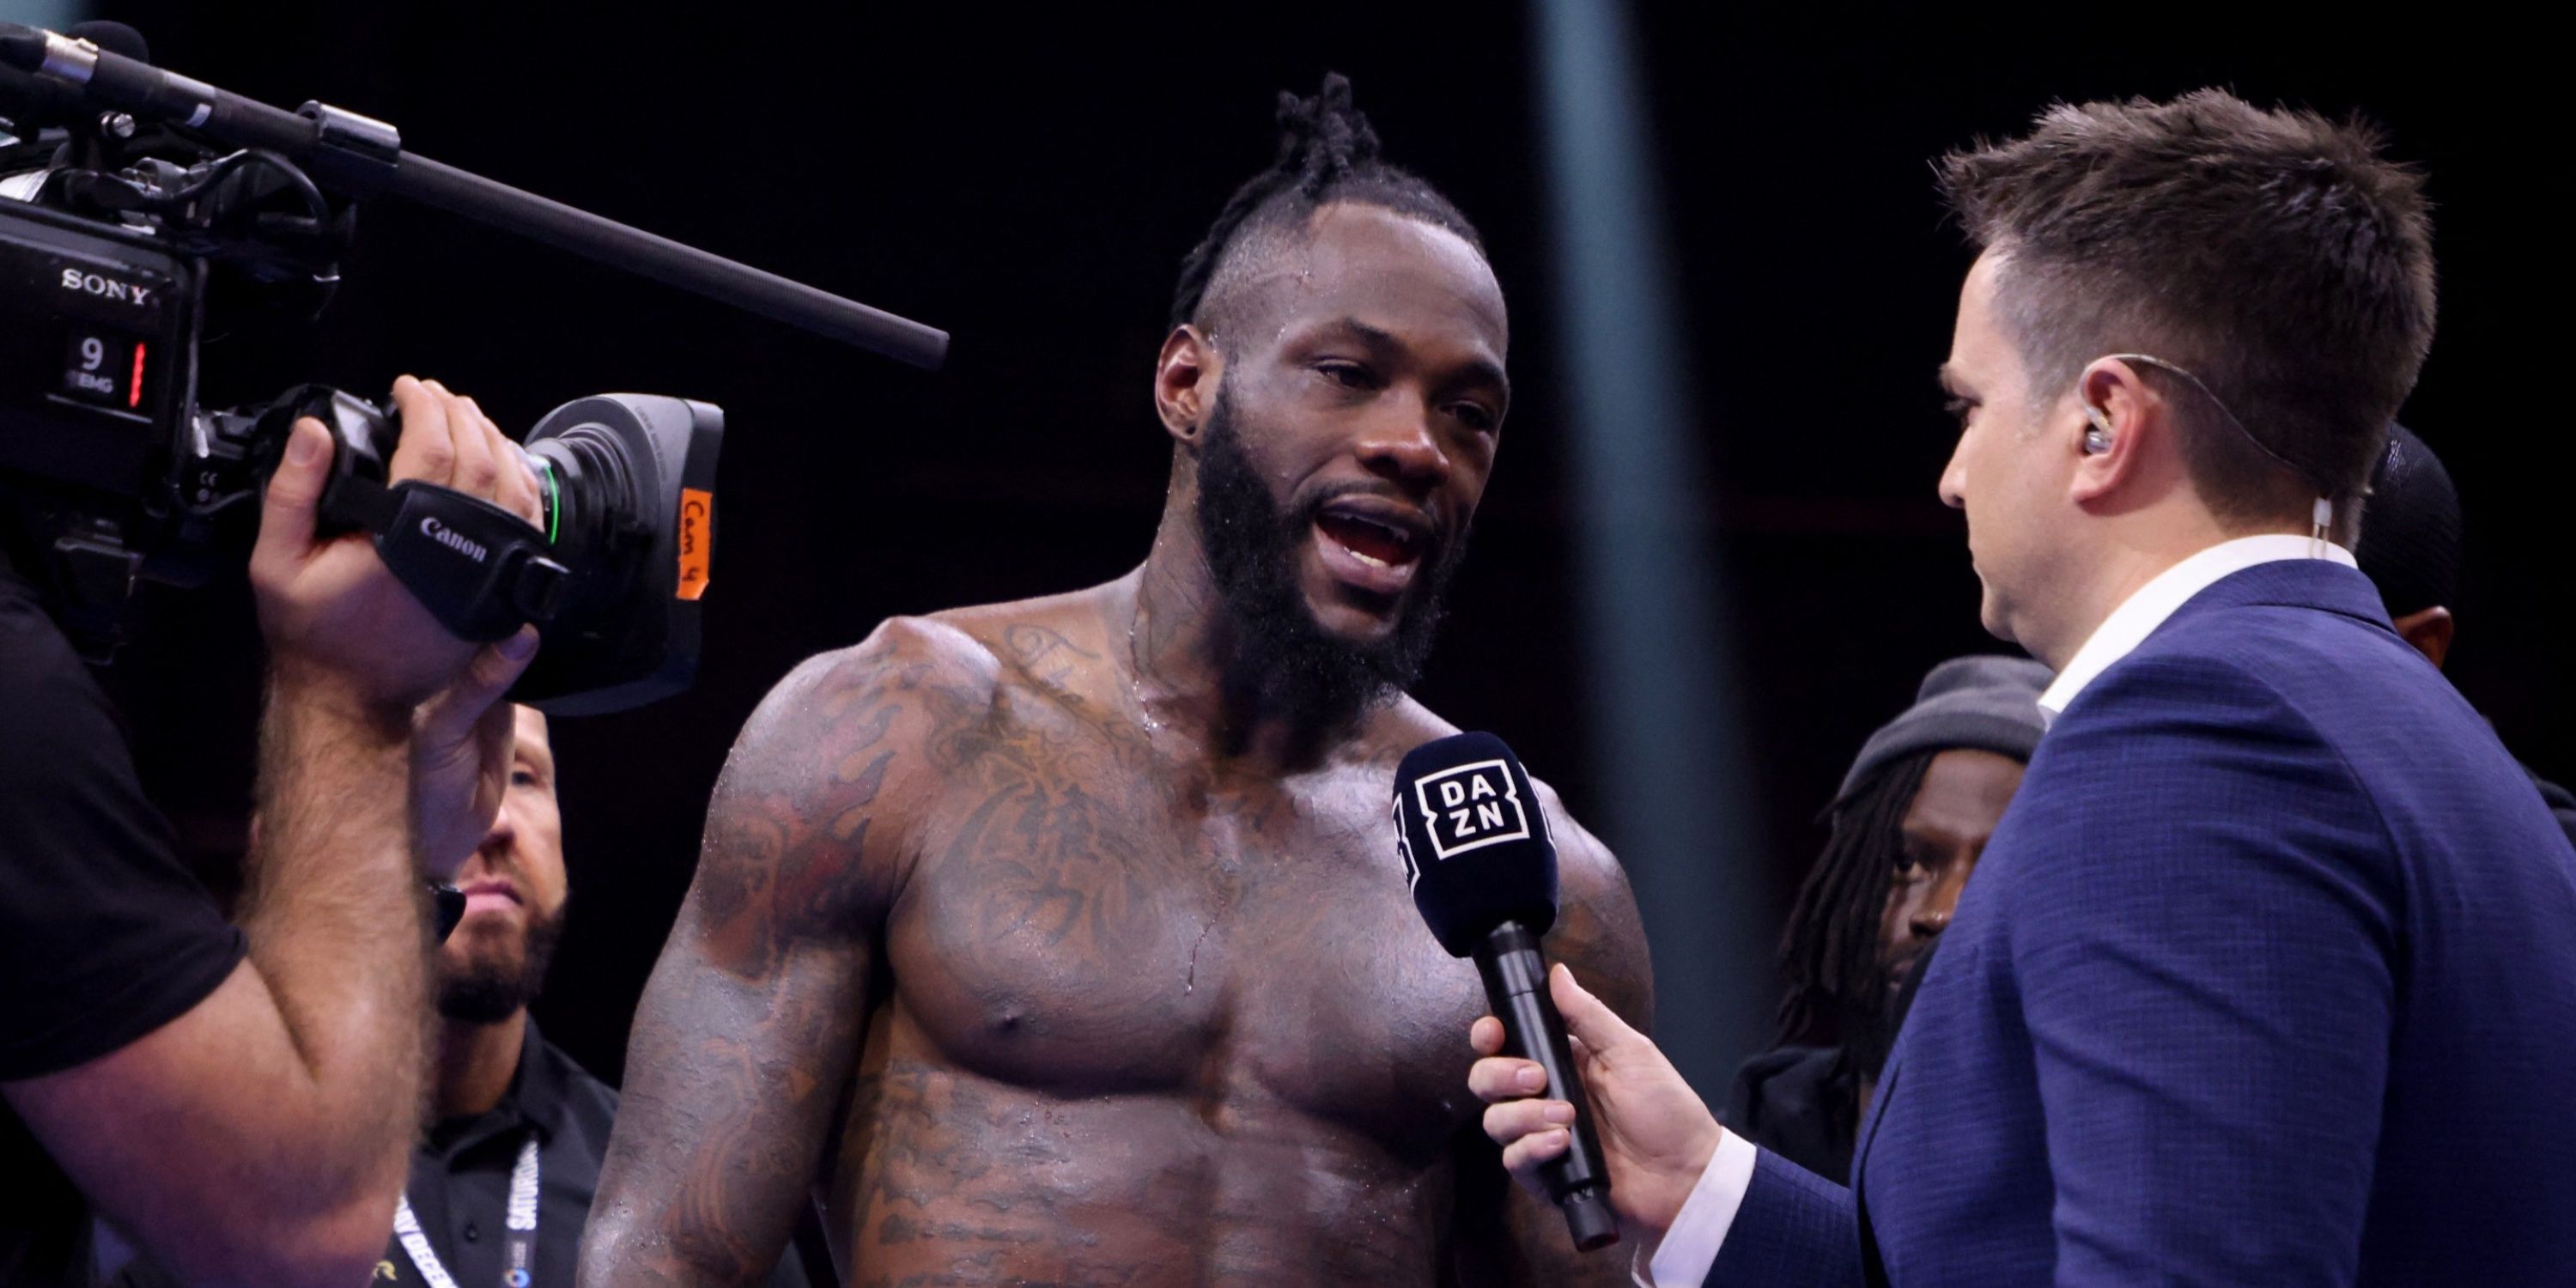 deontay wilder claims oleksandr usyk would be an 'easy night'